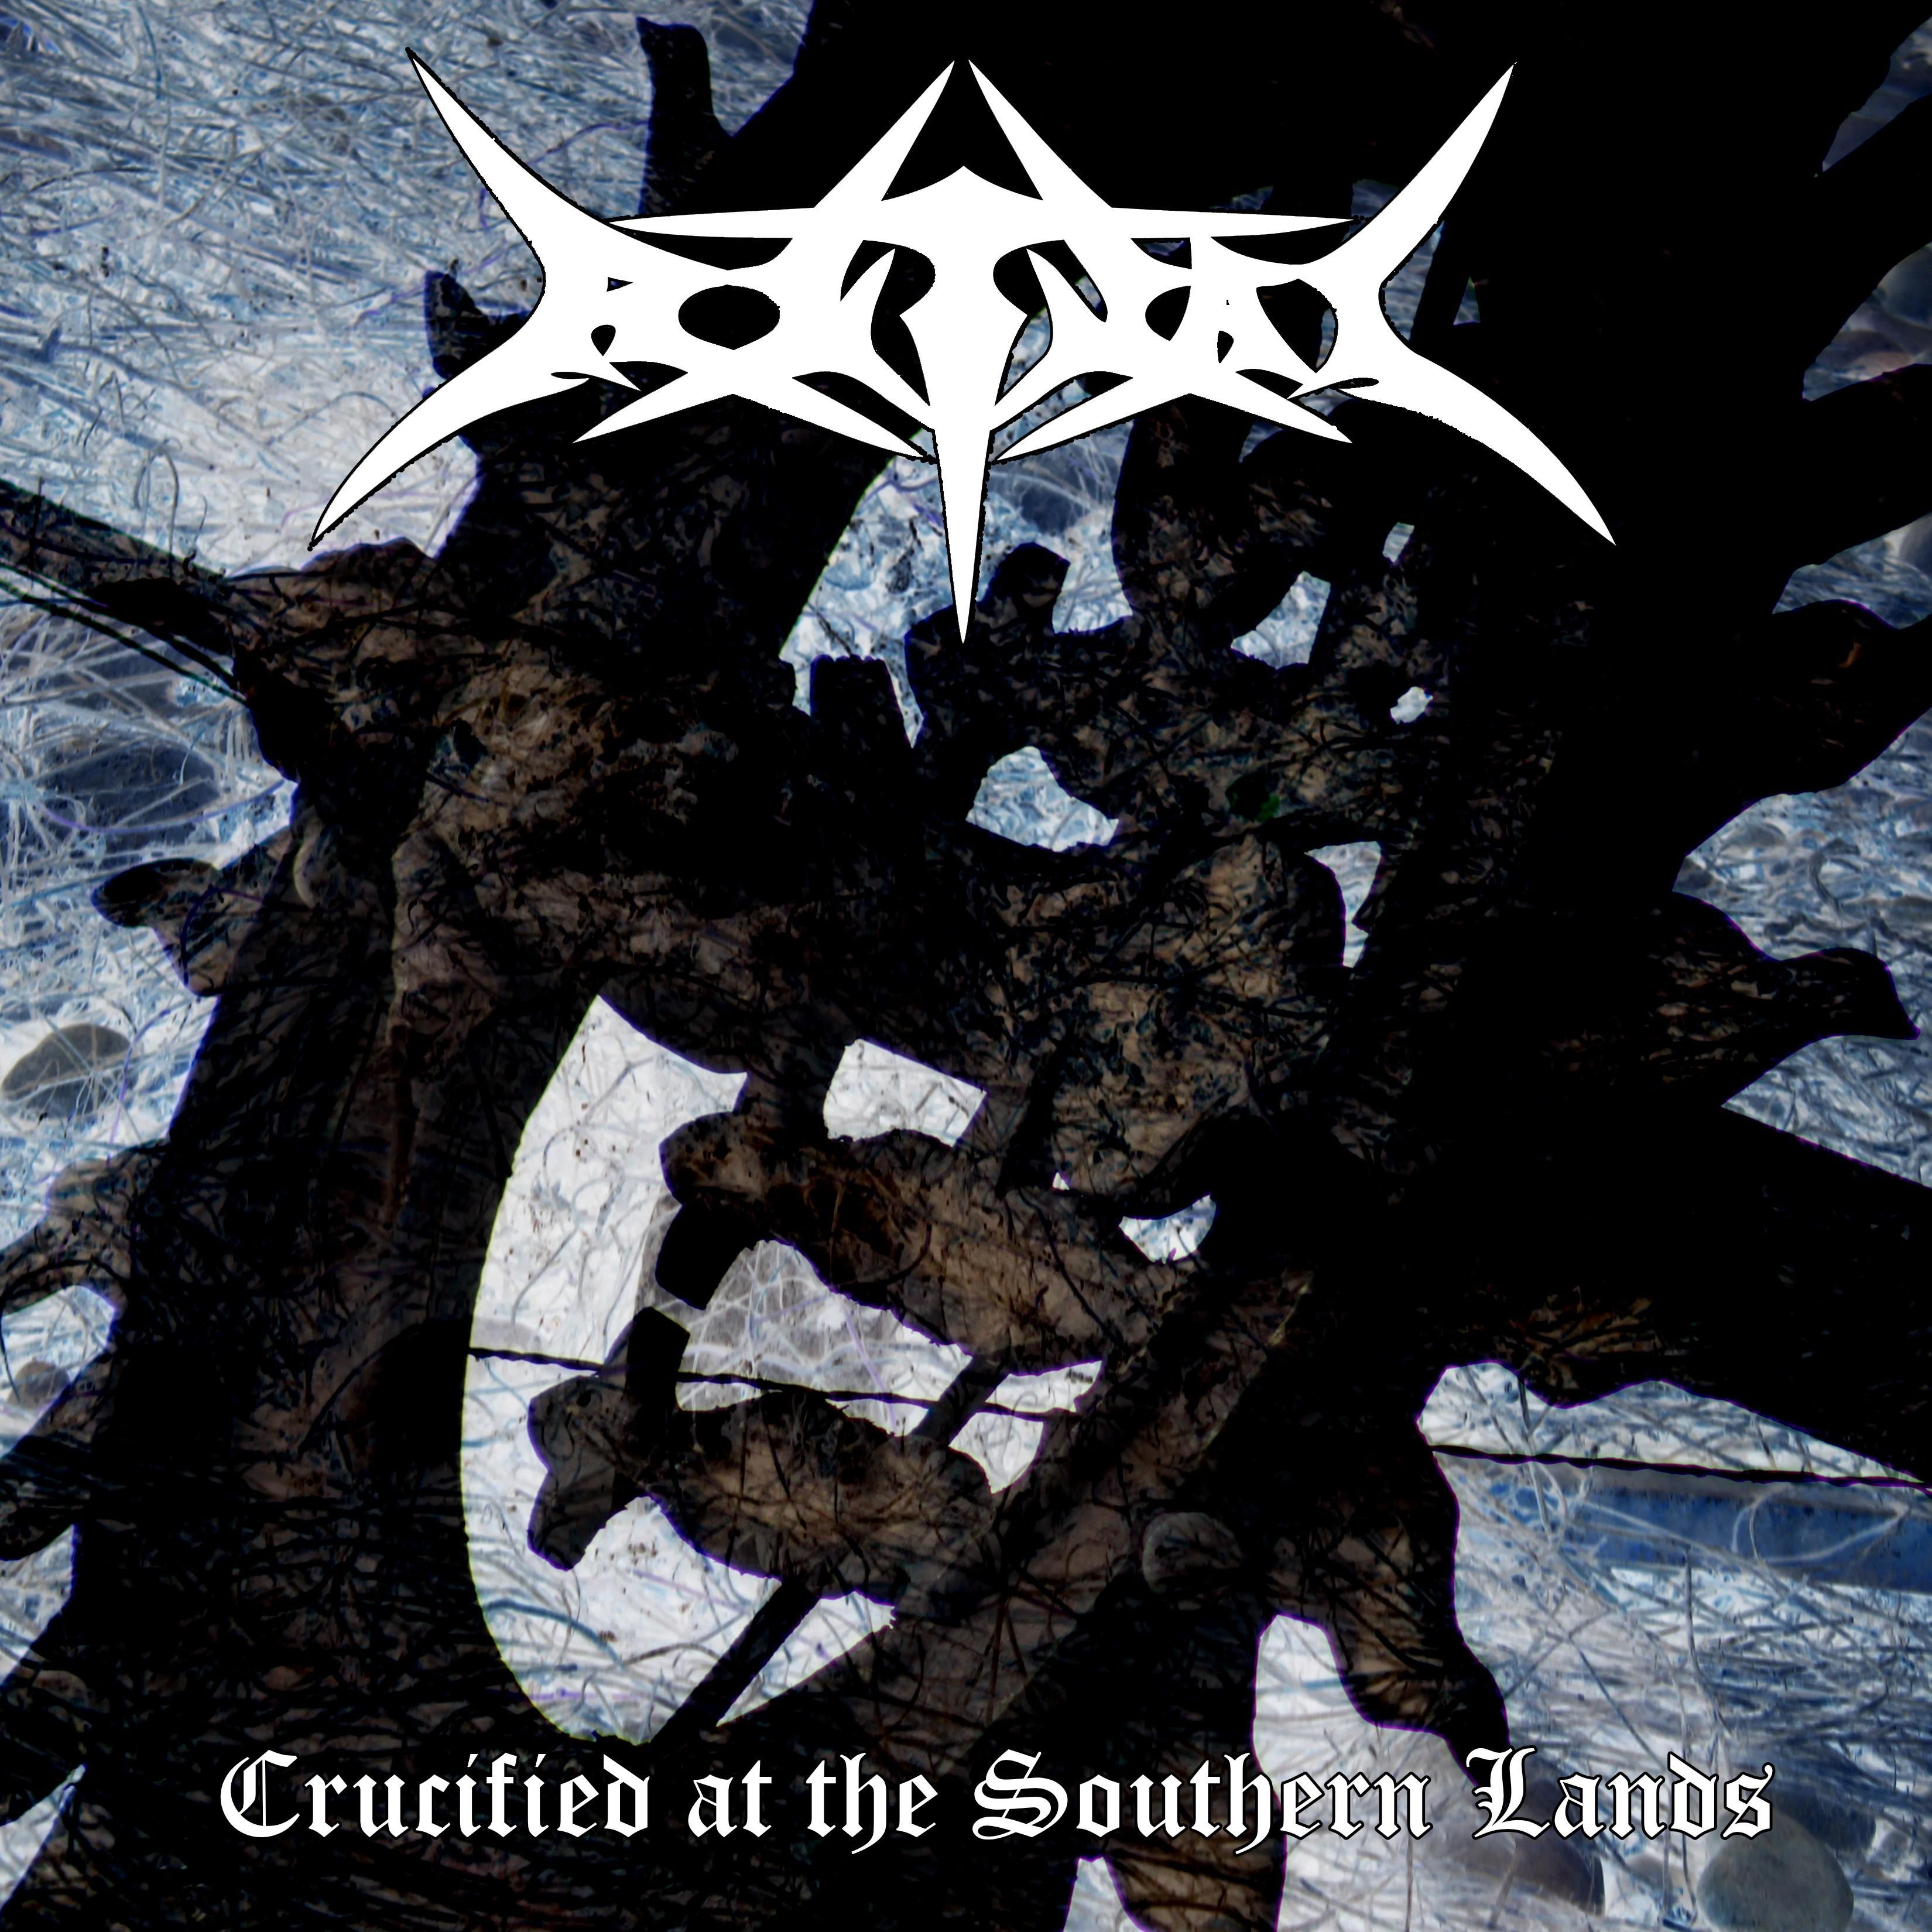 Crucified at the Southern Lands